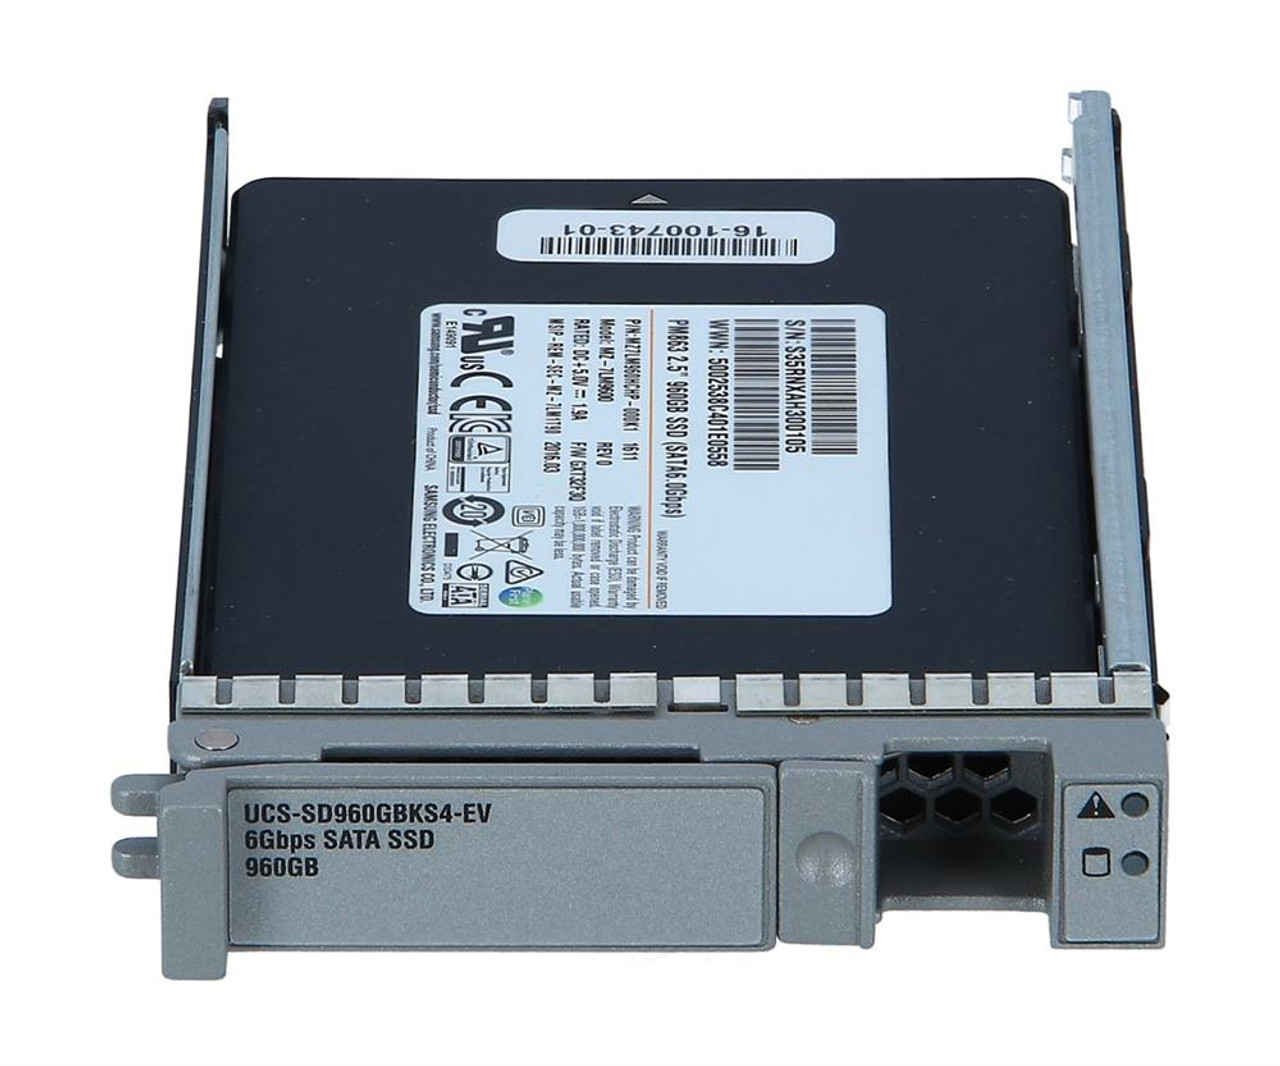 Cisco 960GB SAS 12Gbps Enterprise Value 2.5-inch Internal Solid State Drive (SSD)